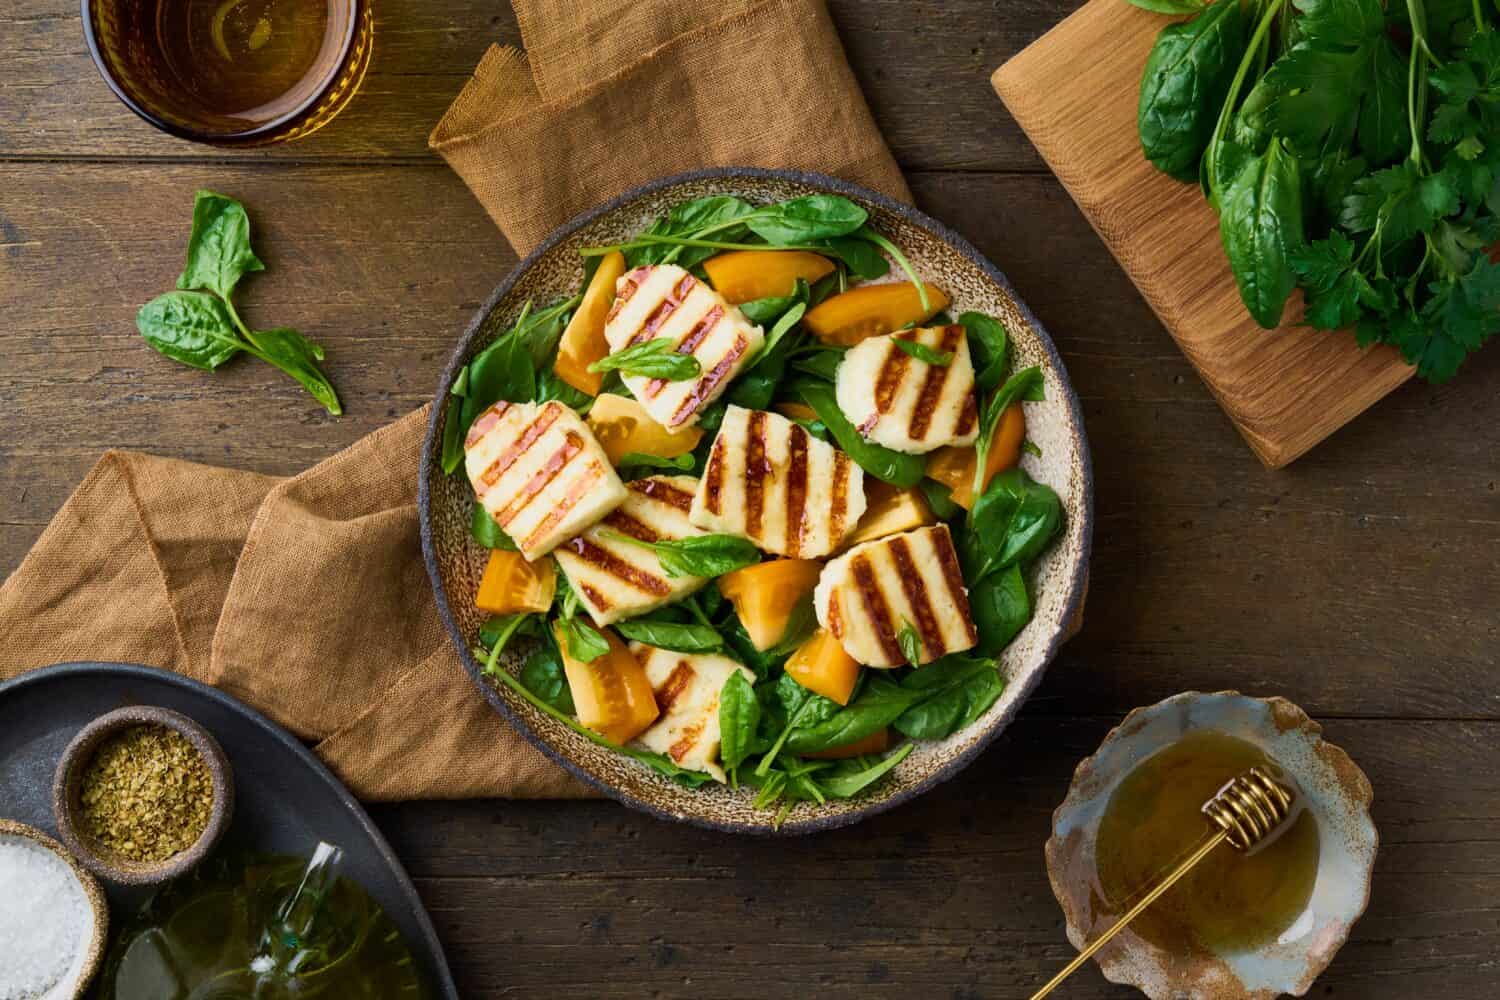 Tasty vegetarian healthy salad with orange tomatoes, fresh spinach, grilled halloumi cheese, honey and olive oil sauce with spices. Horizontal, top view, brown wood background